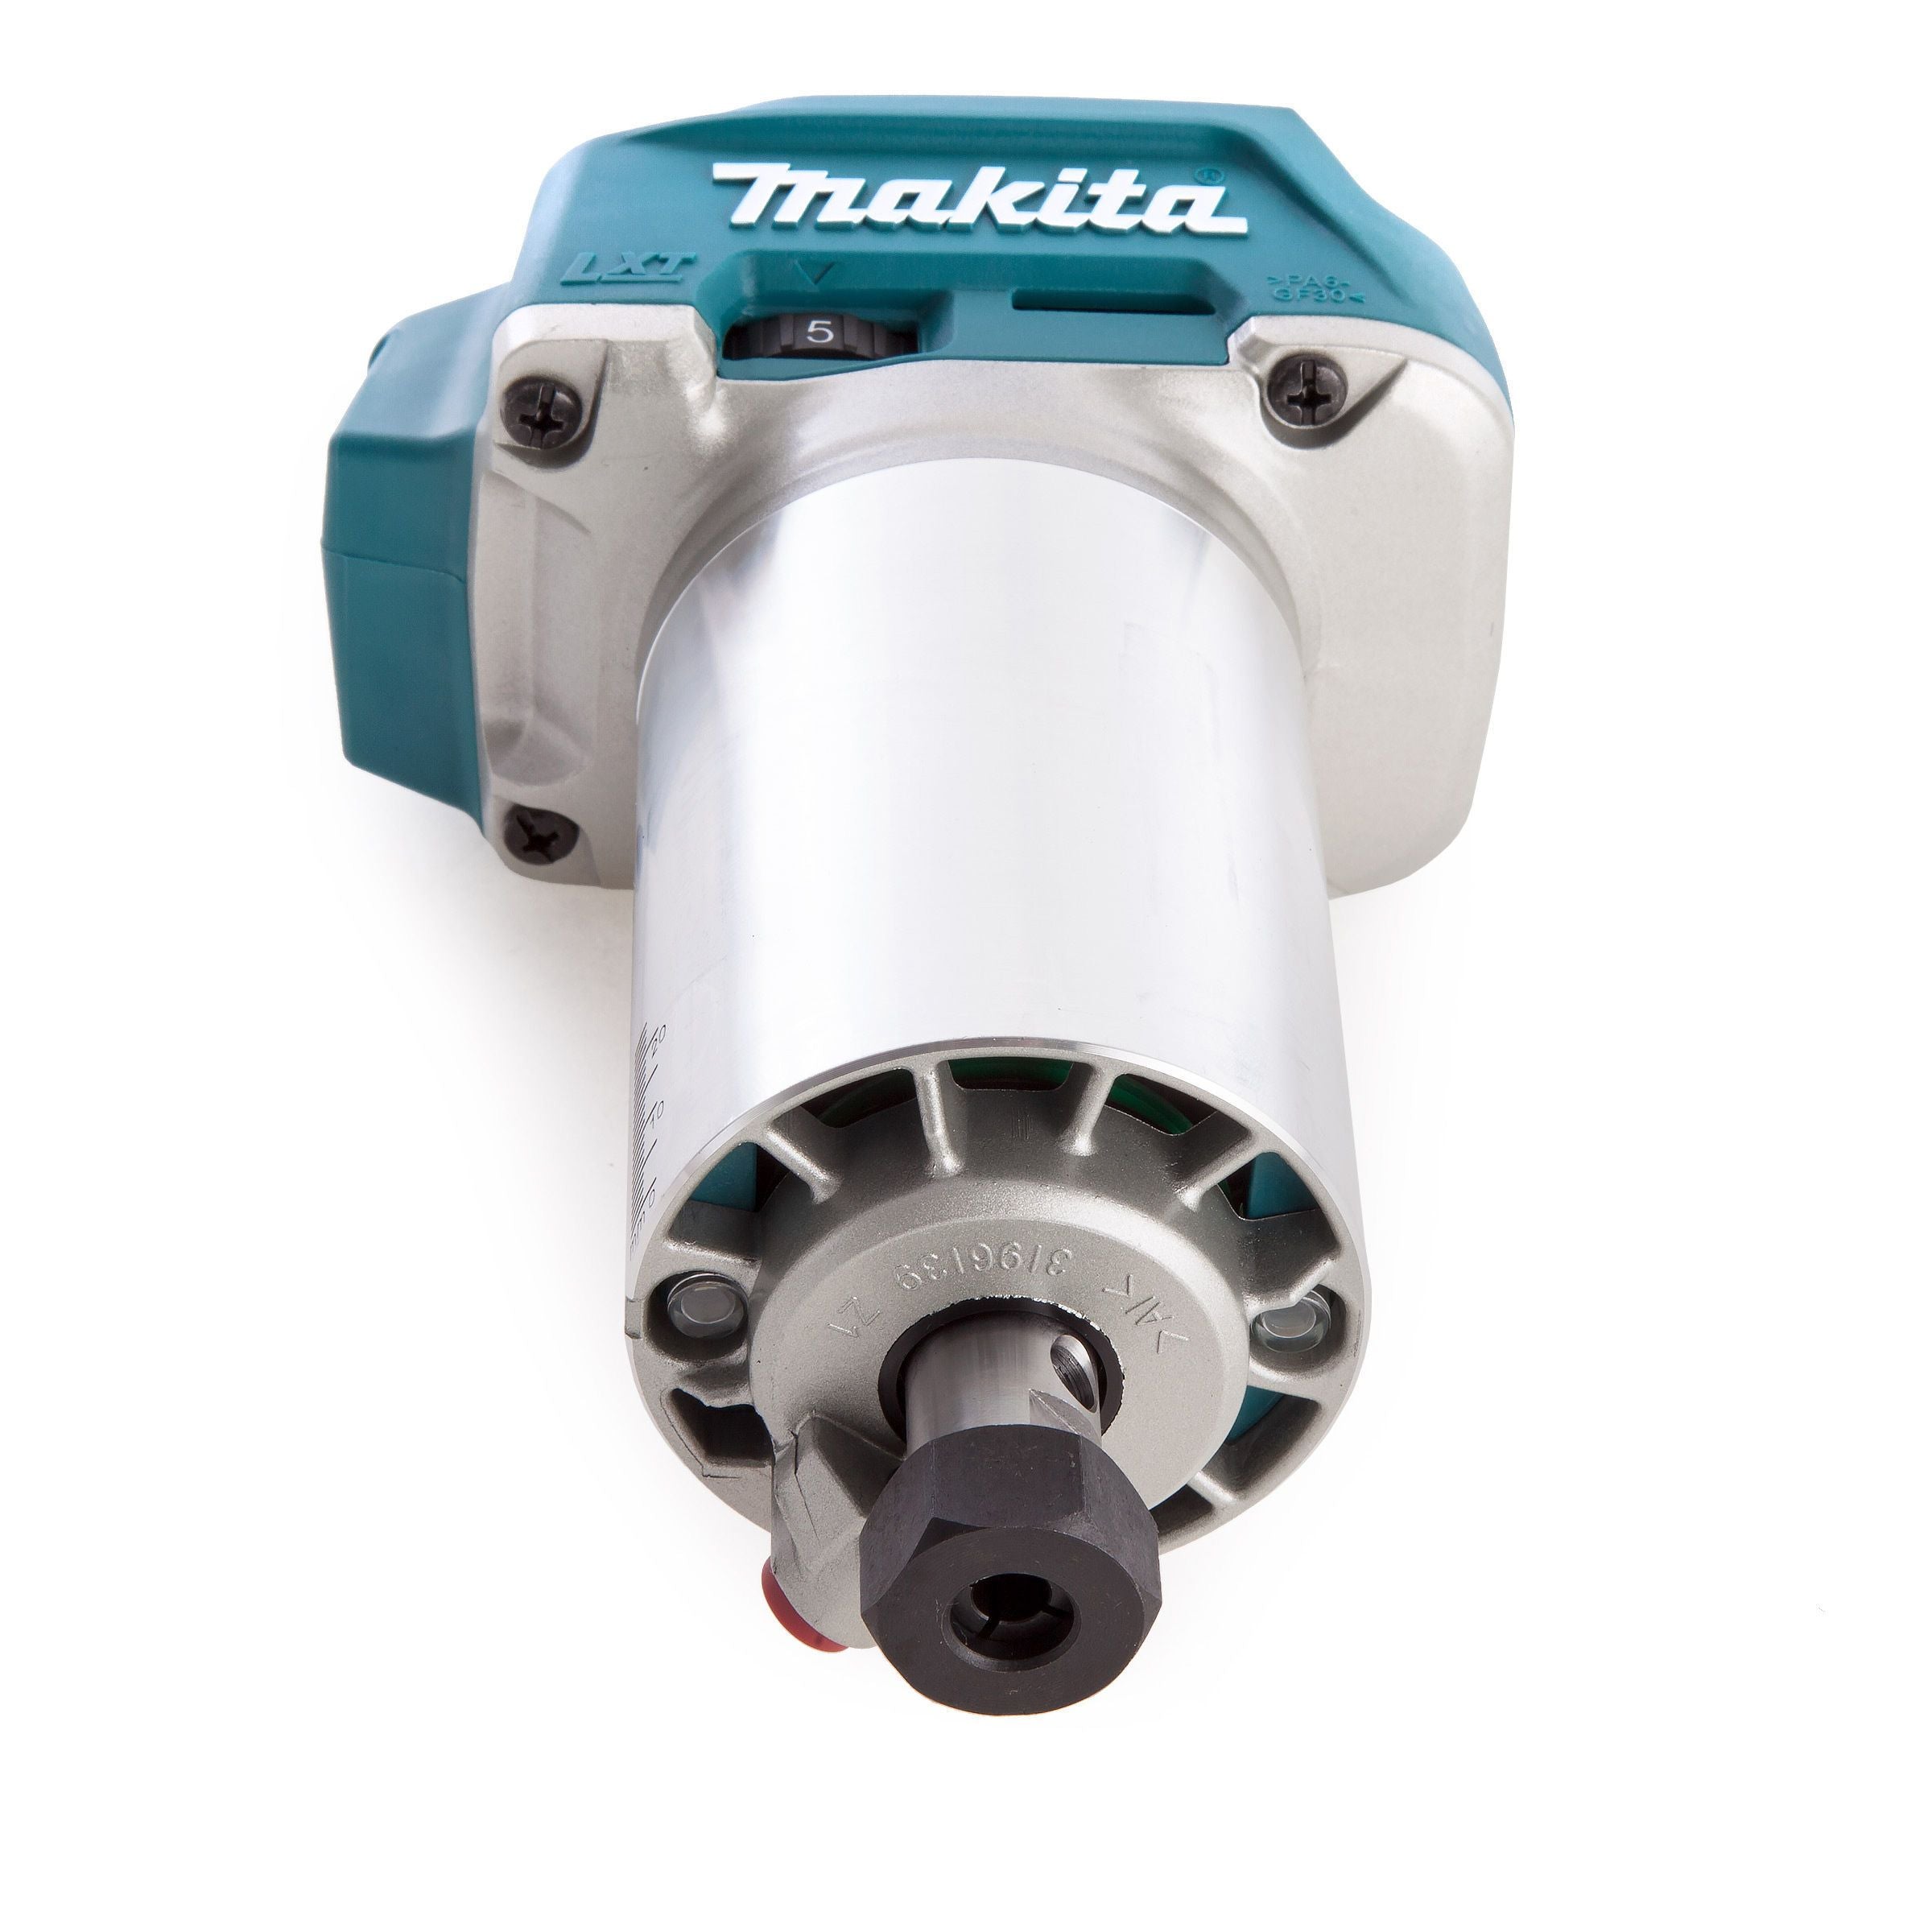 Makita 18V Cordless Router Laminate Trimmer DRT50 Solo Power Tool Services